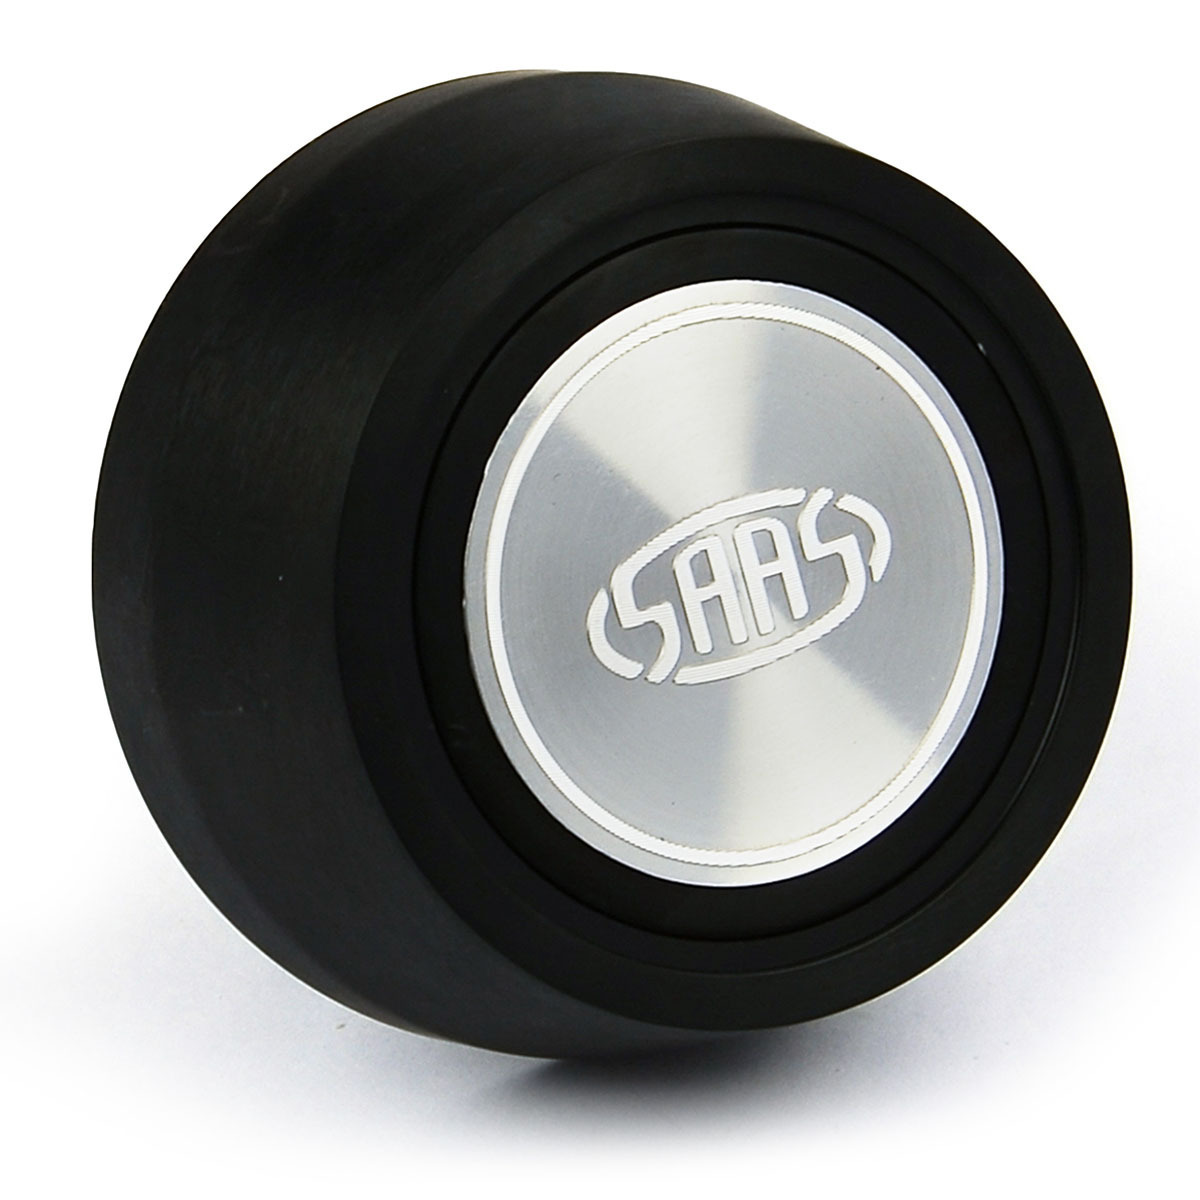 Deep Dish Steering Wheel Kit Including Deep Dish Horn Button Poly 15" Classic Black Alloy Slotted